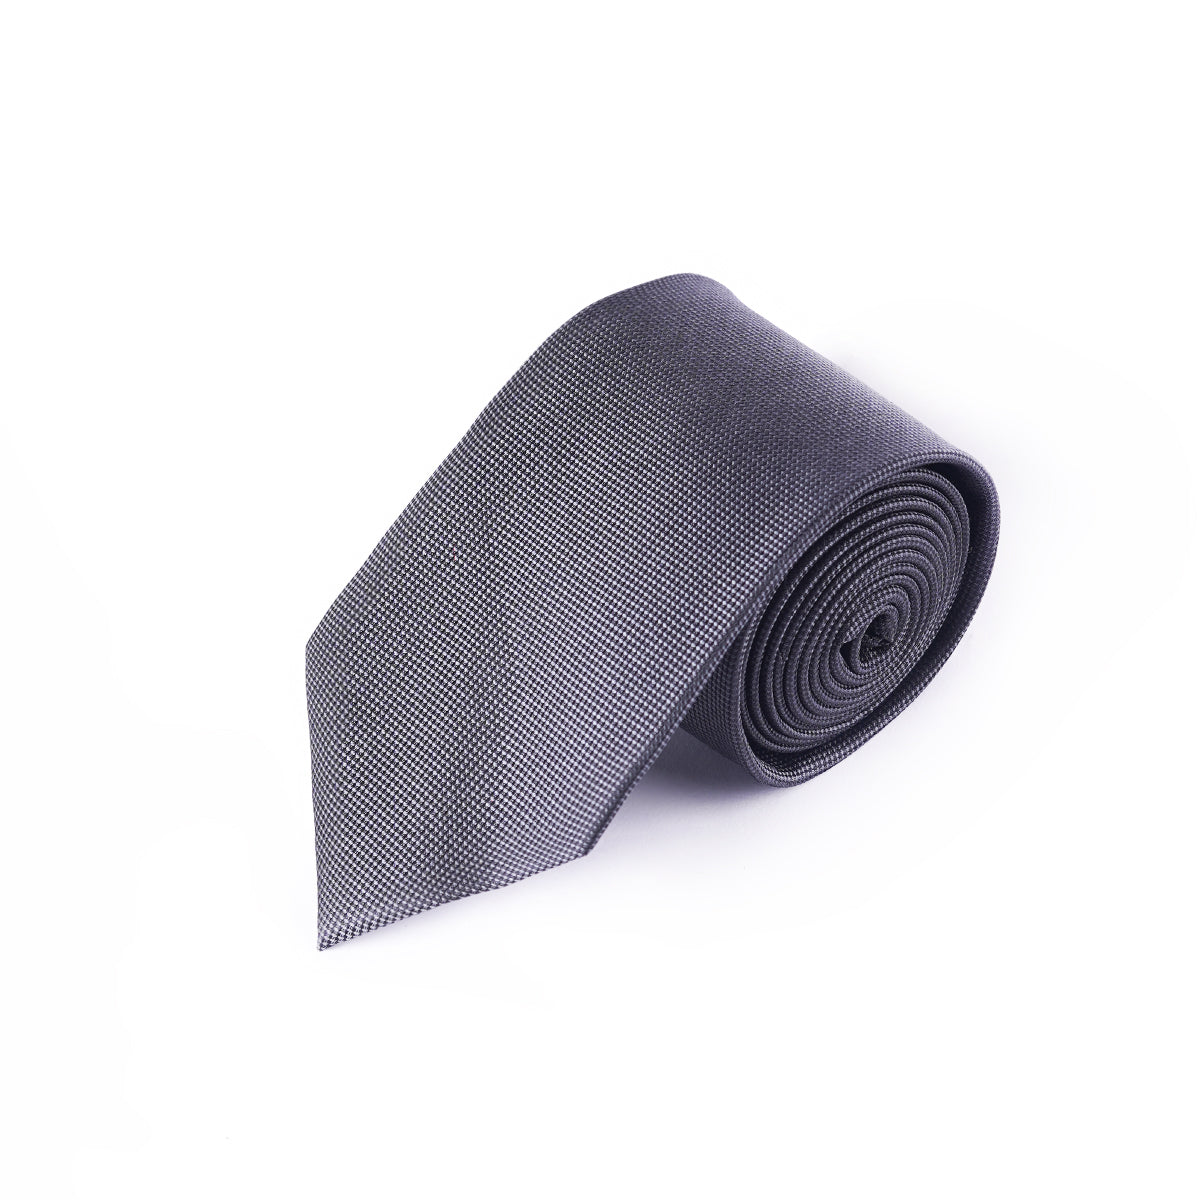 Dotted-Black, Pure Silk Neck Ties